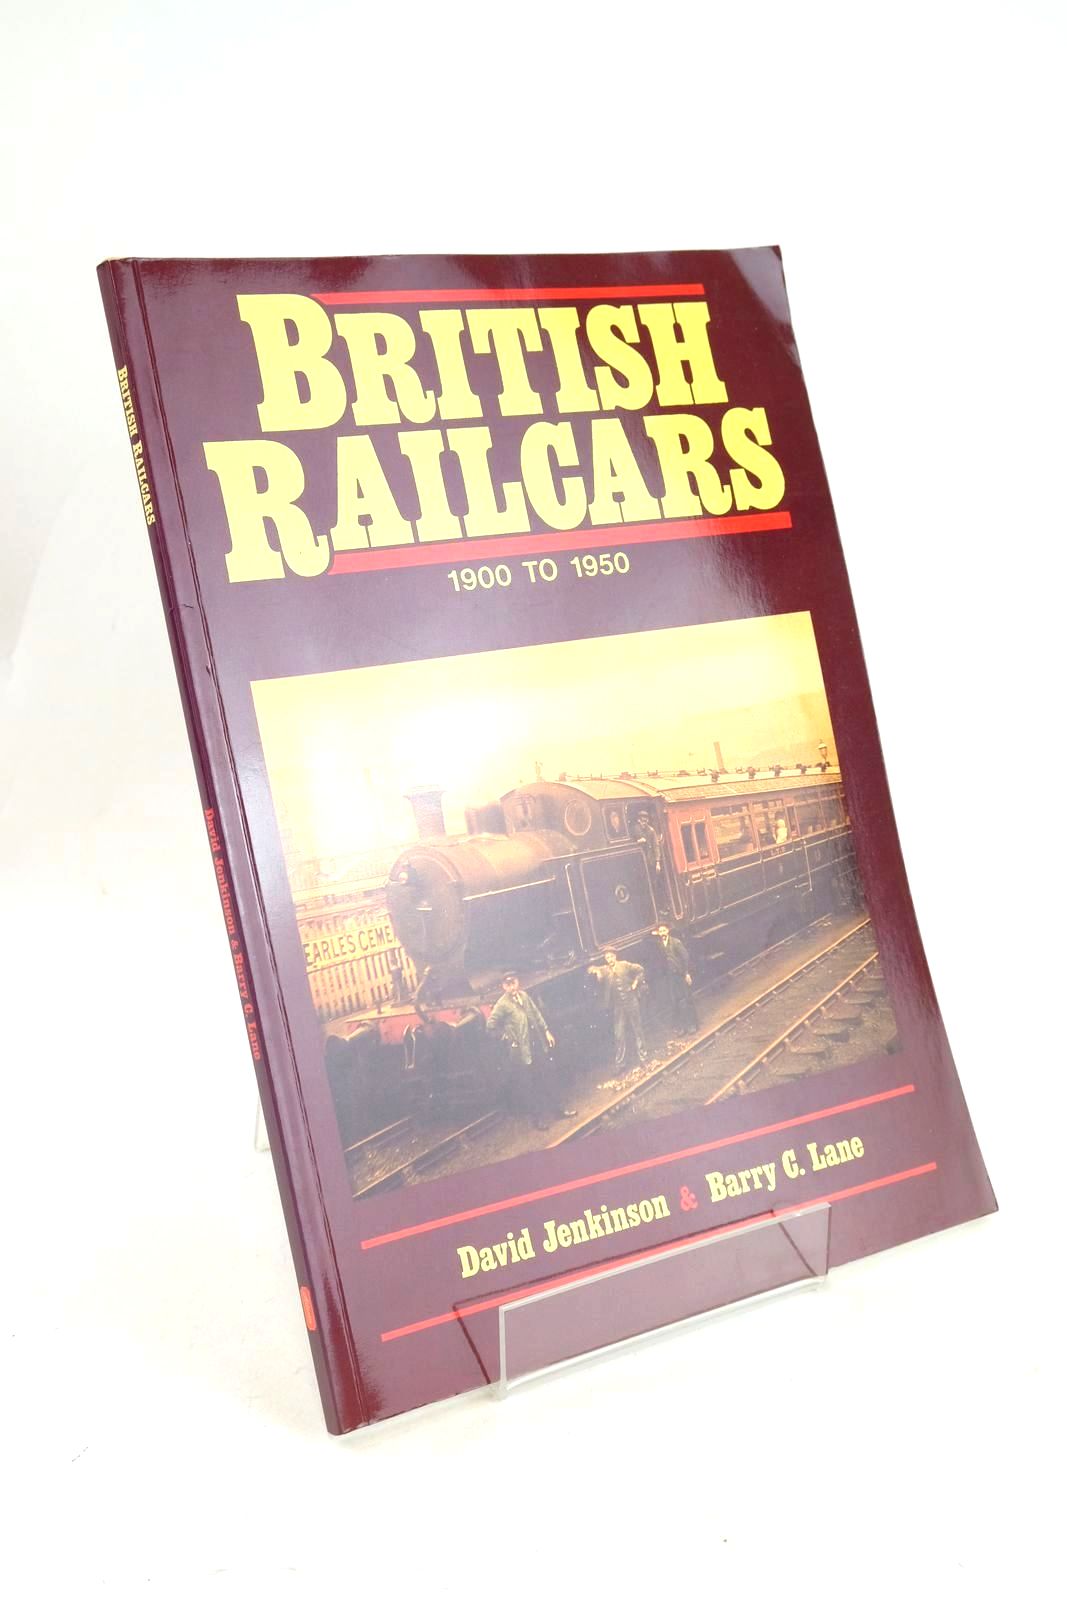 Photo of BRITISH RAILCARS 1900-1950 written by Jenkinson, David Lane, Barry C. published by Atlantic Publishers (STOCK CODE: 1327237)  for sale by Stella & Rose's Books